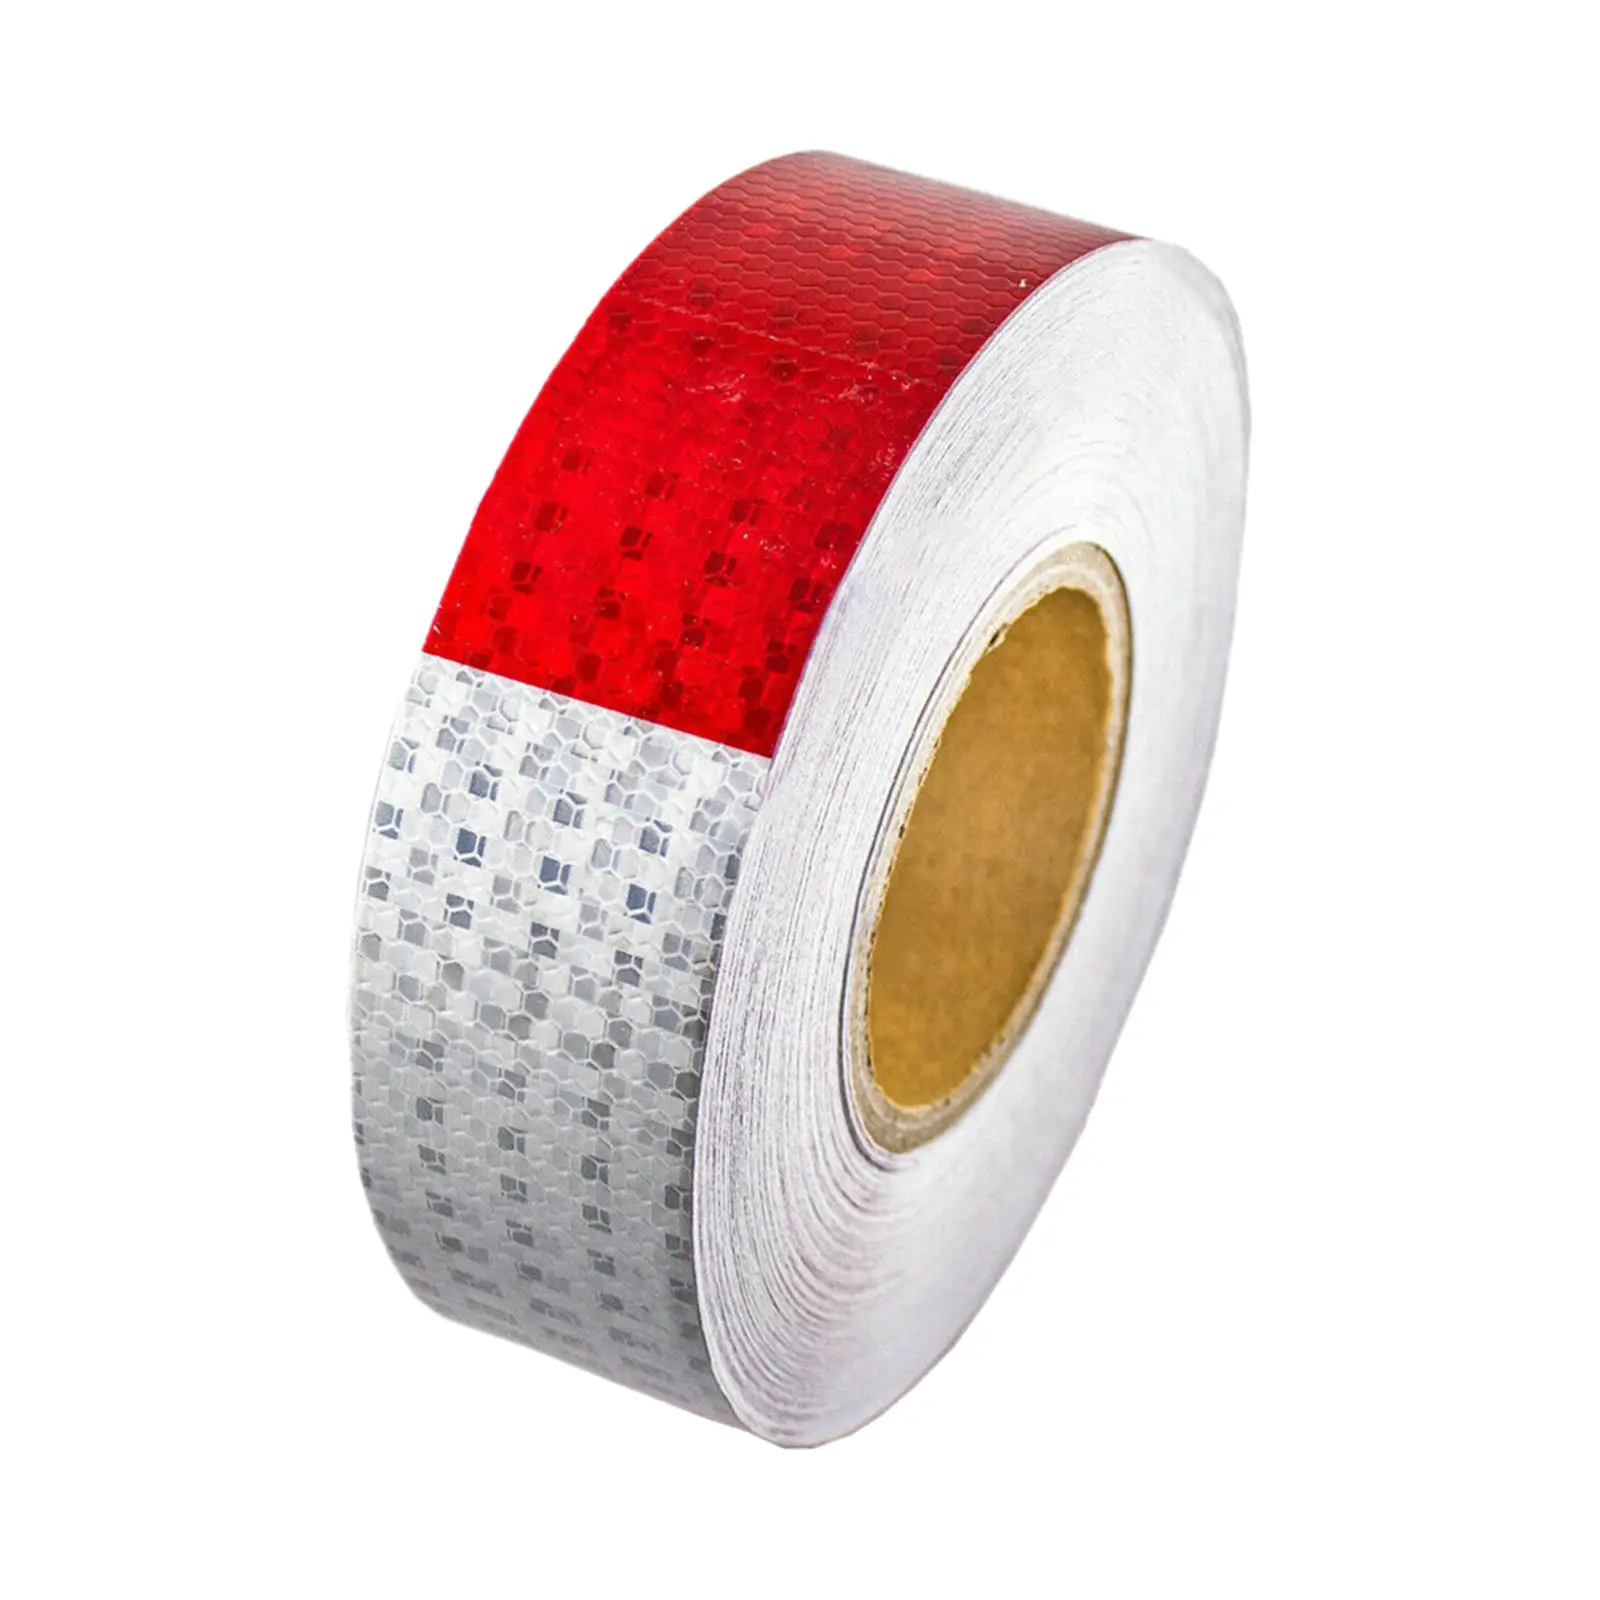 5 Piece of 50mm×150mm Red High Intensity Reflective Stickers Tape Self-Adhesive 